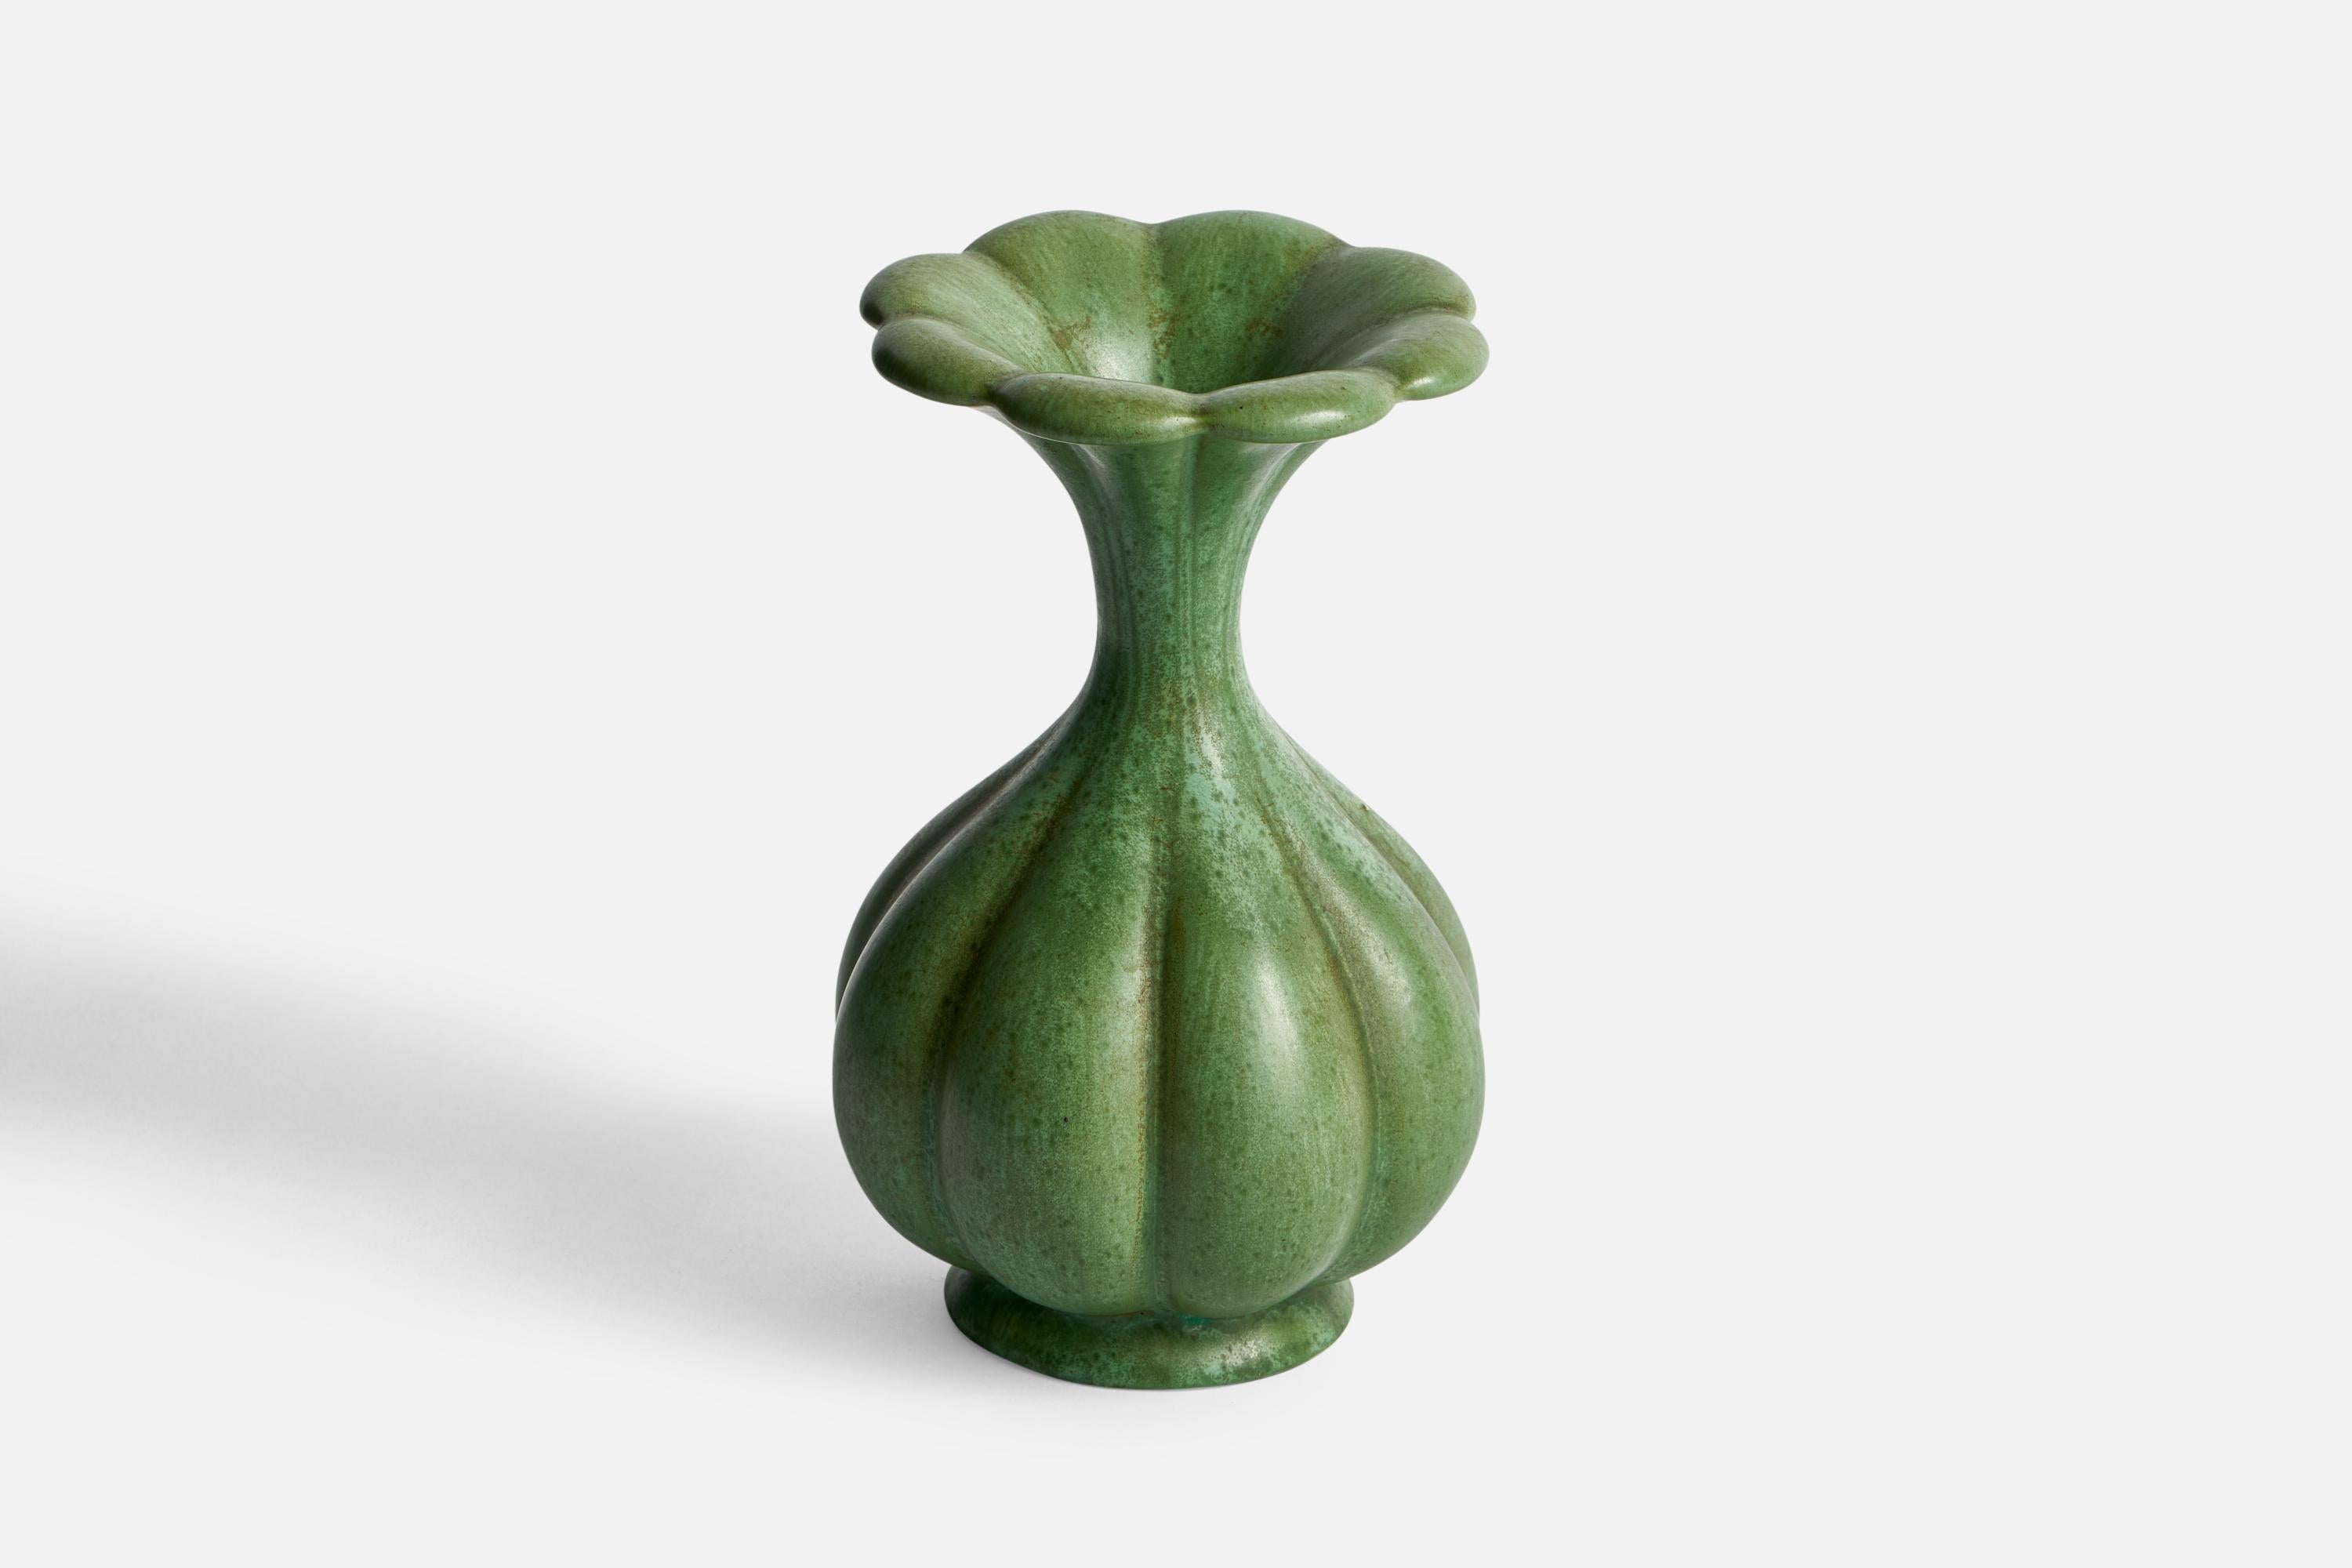 A fluted green-glazed ceramic vase designed by Arthur Percy and produced by Gefle, Sweden, 1930s.